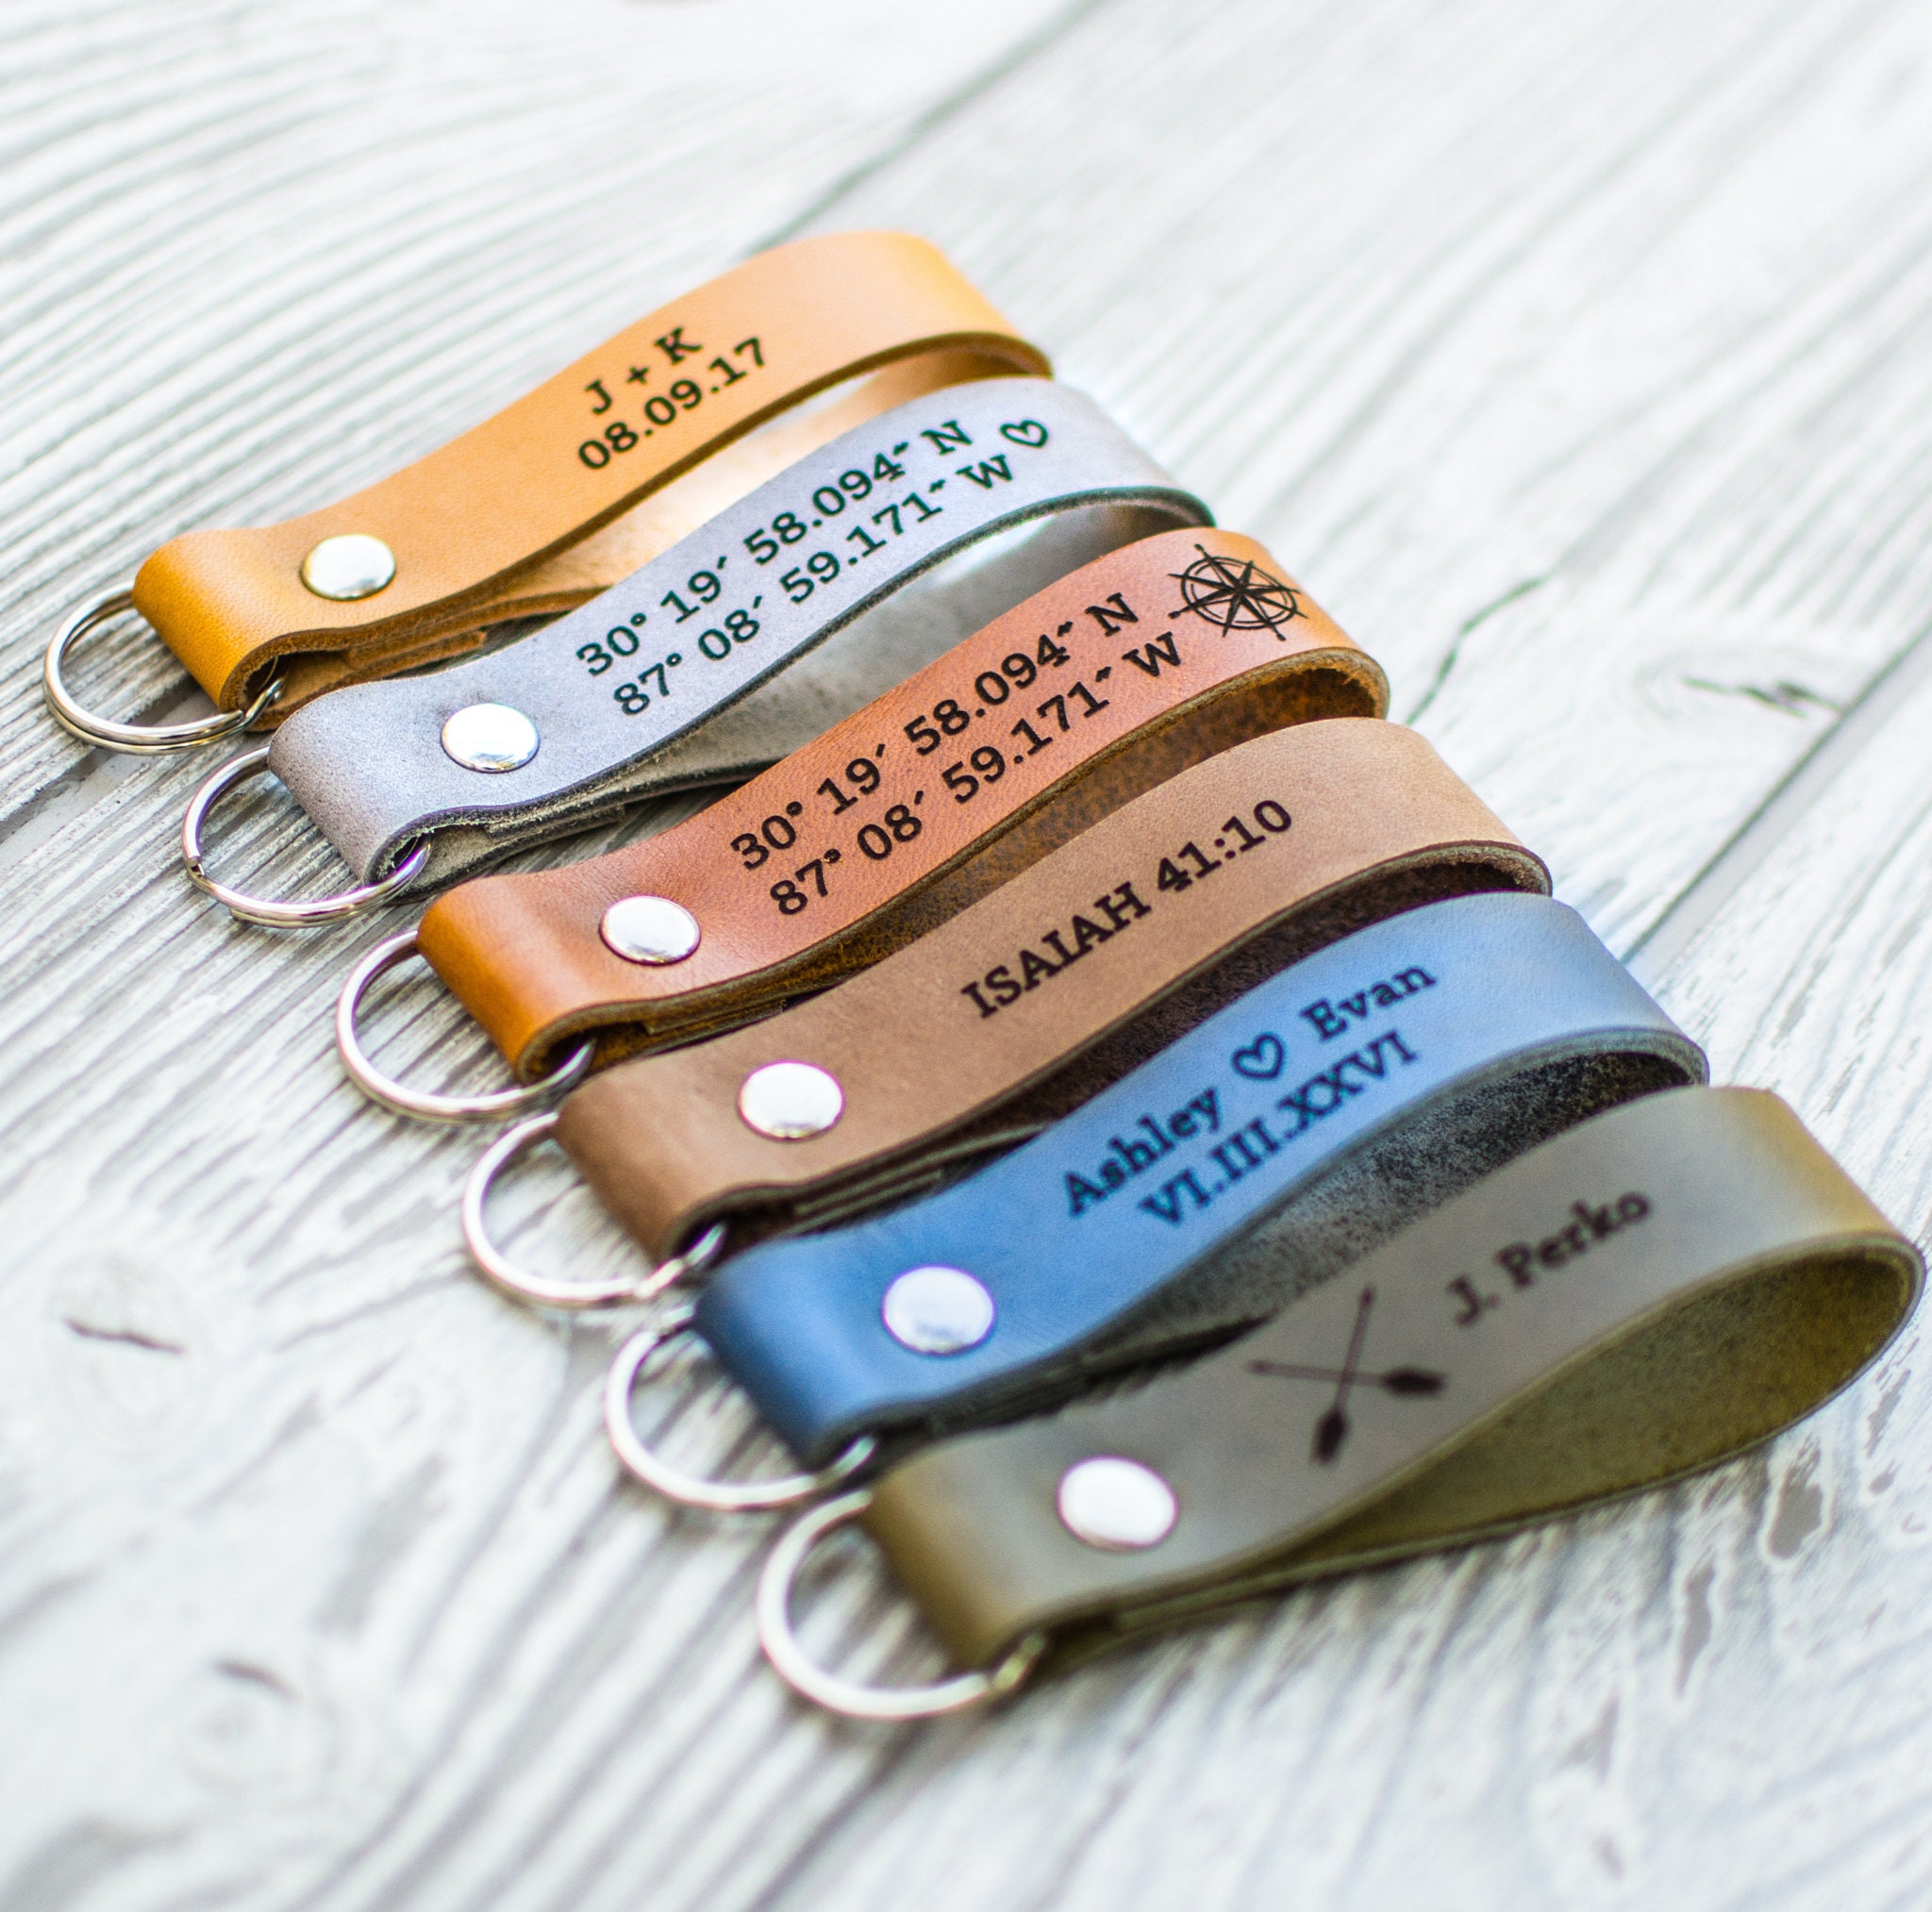 IRONandGRAINusa Personalized Leather Keychain, Custom Leather Key Chain, Mens Gift, Gift for A Wife, Unique Gift, 3 Year Anniversary, Coordinates Key Chain